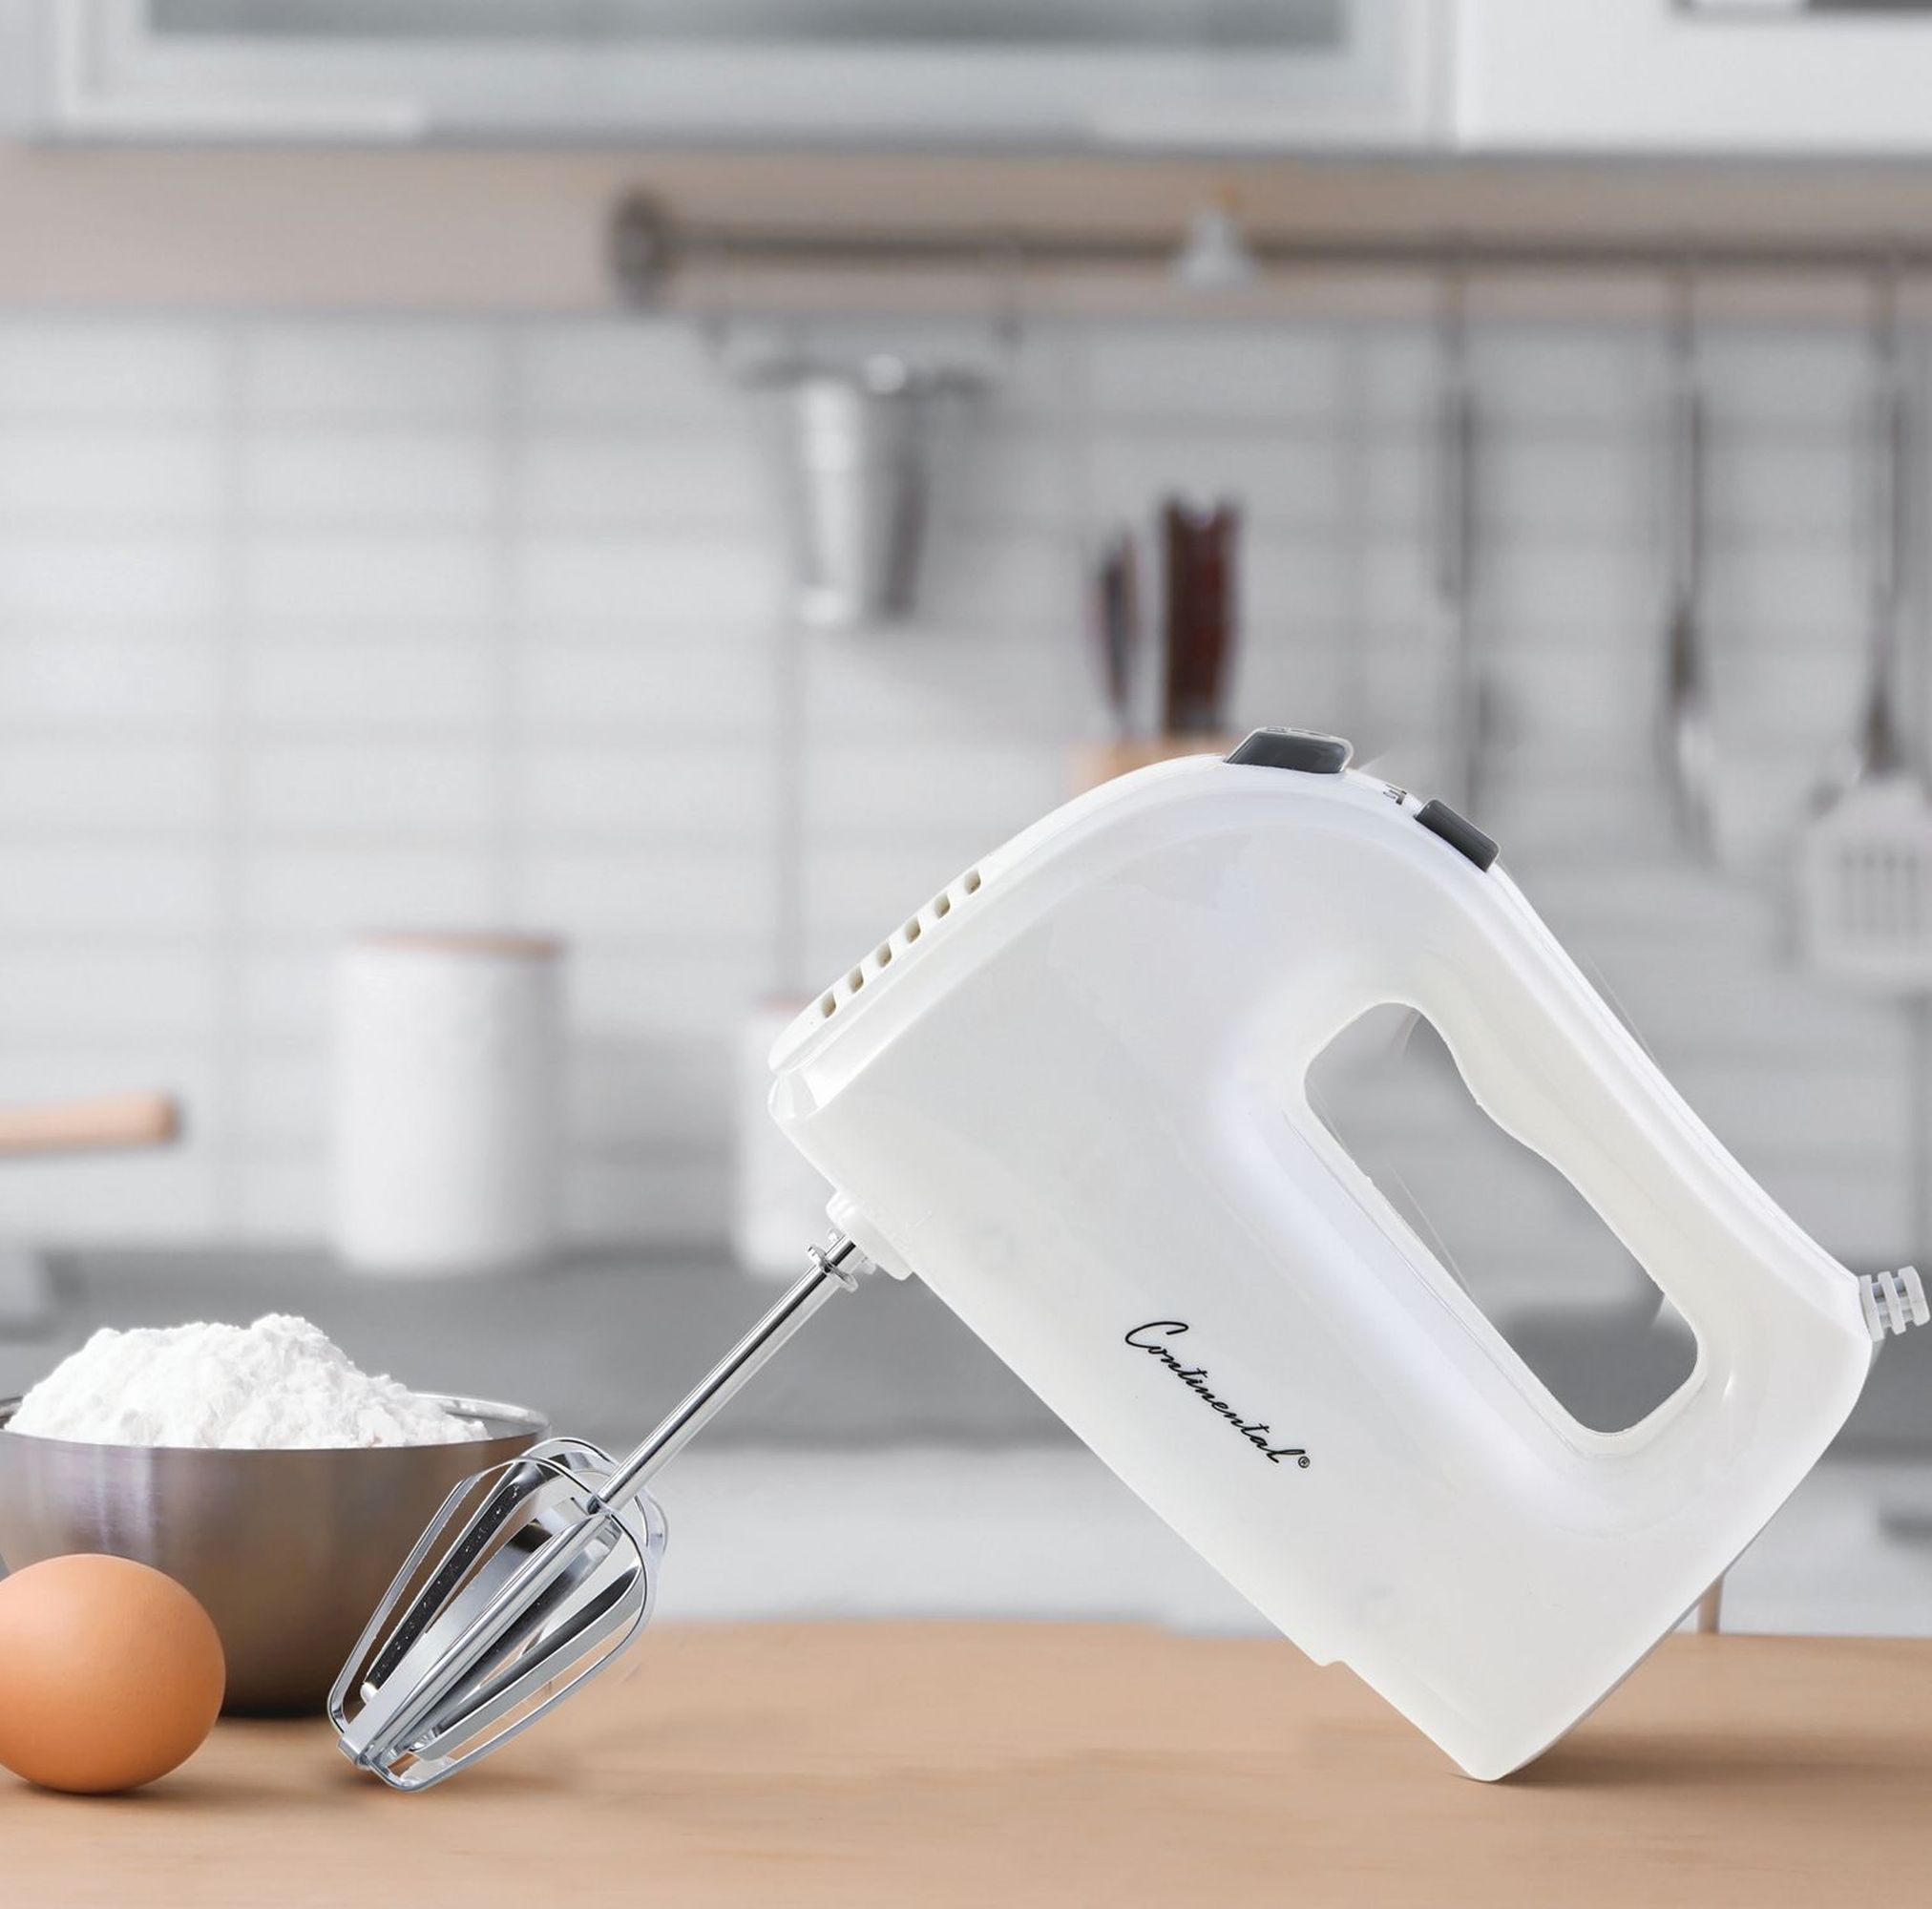 Continental Electric New 5 Speed Hand Mixer White - image 2 of 4